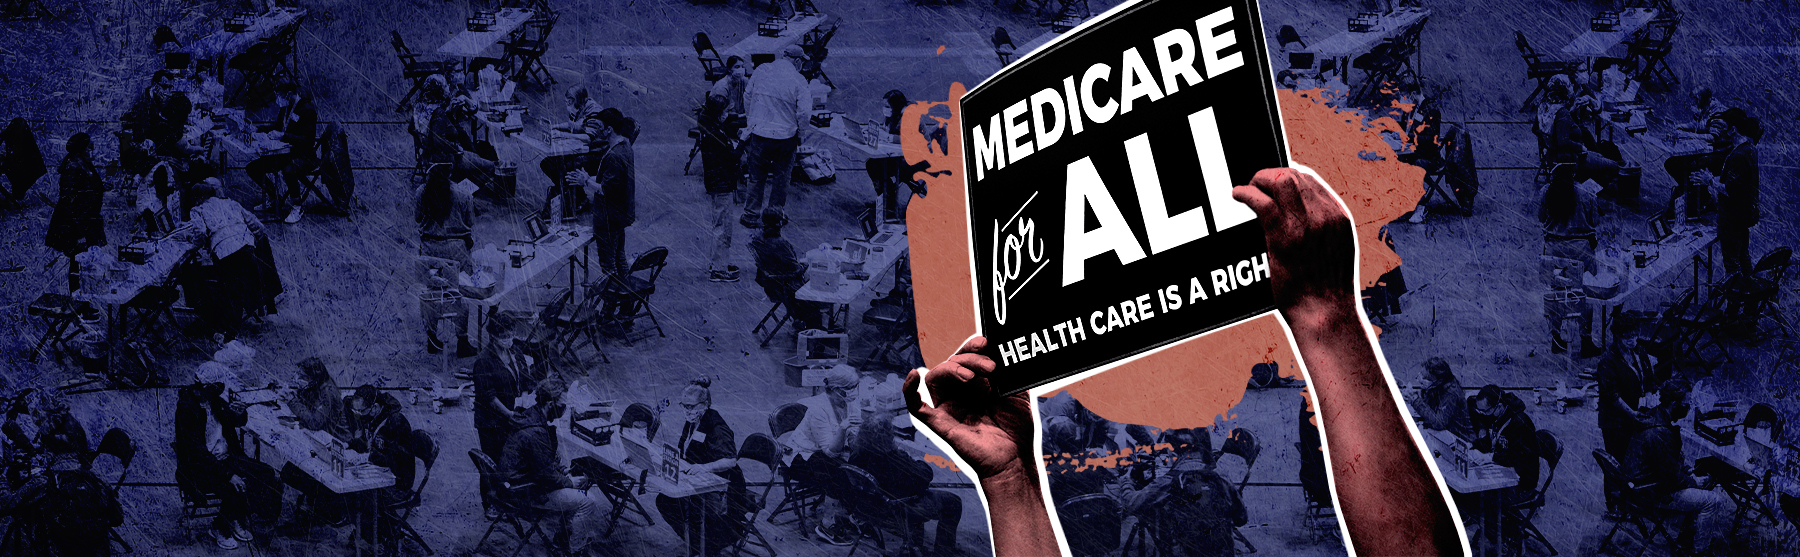 A Medicare for All sign.